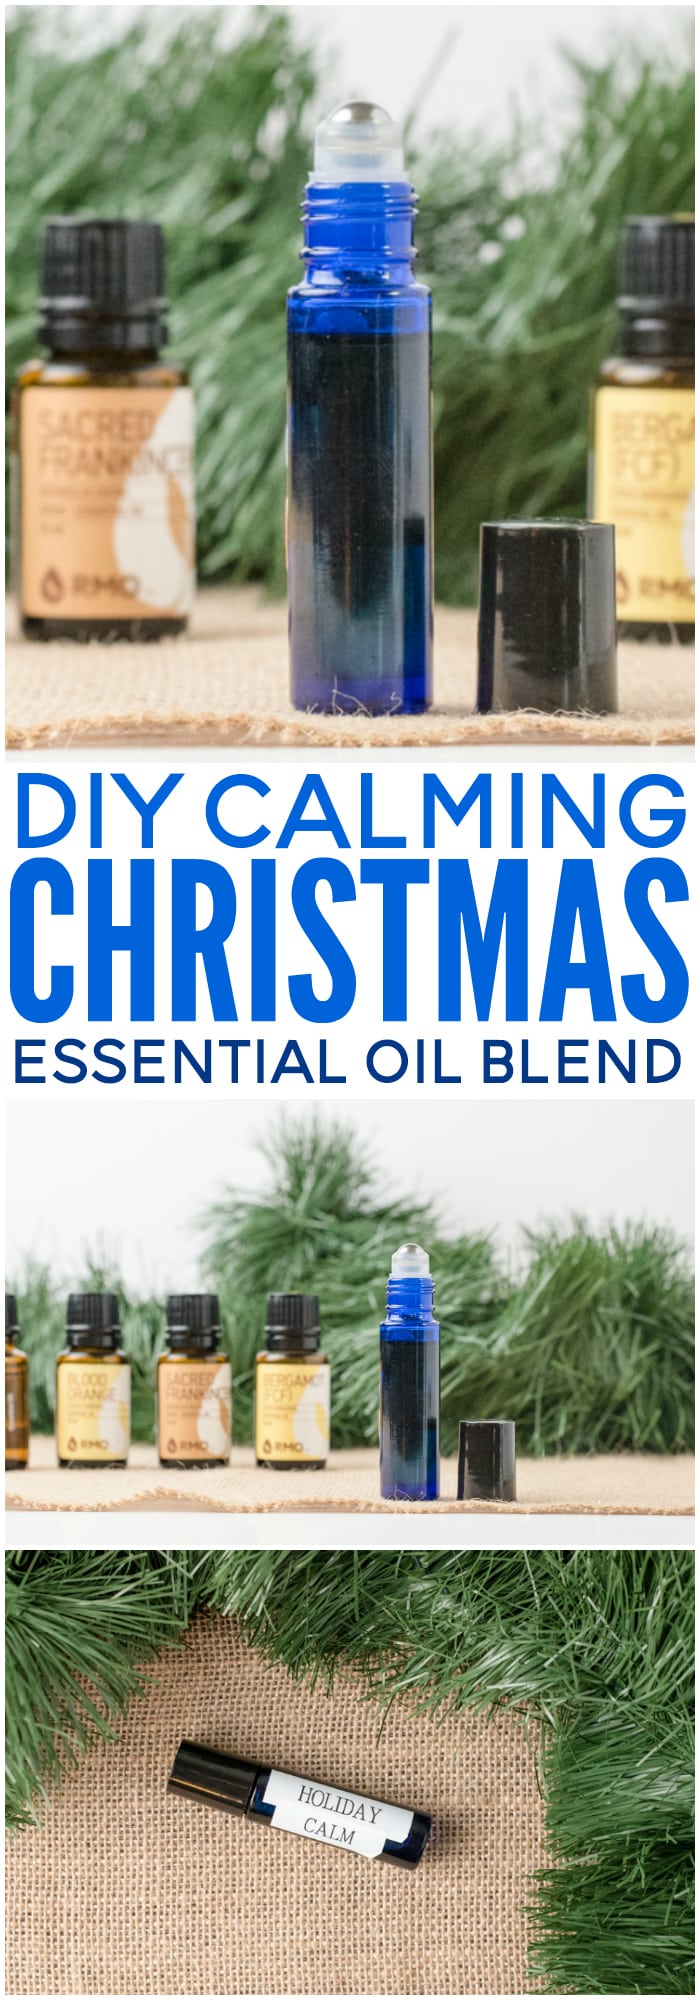 This Holiday Calming Essential Oil Blend can bring back the joy this Christmas. It may help uplift your mood, reduce stress levels, relax, and improve brain fog. (Moms love it!) Get the easy DIY blend here.